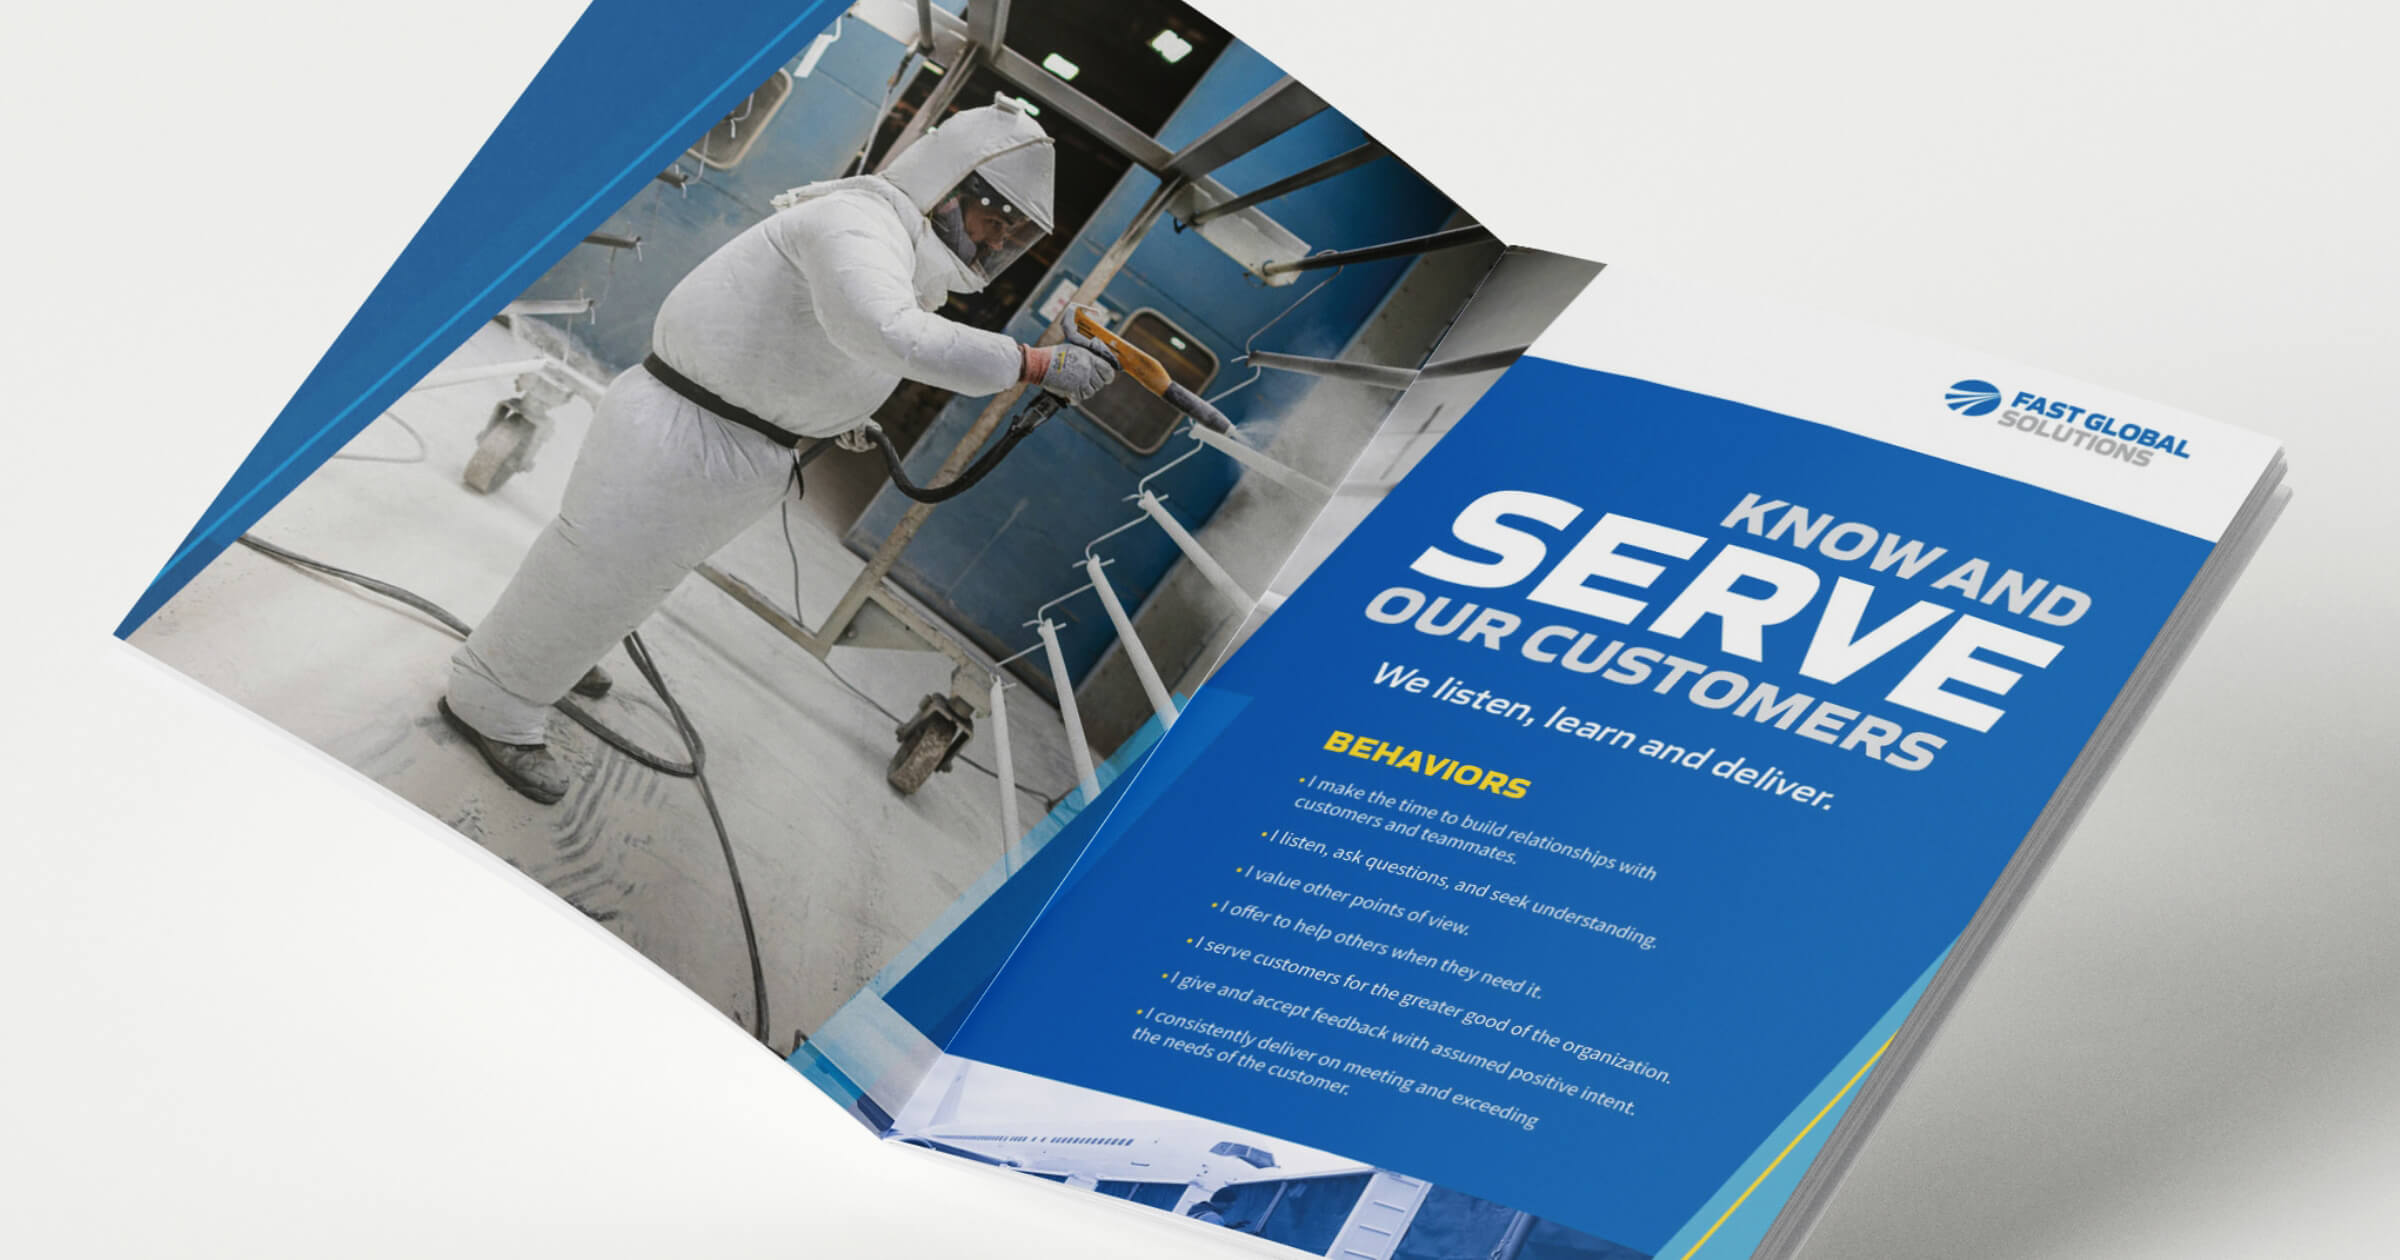 A brochure featuring an image of a welder and the company values